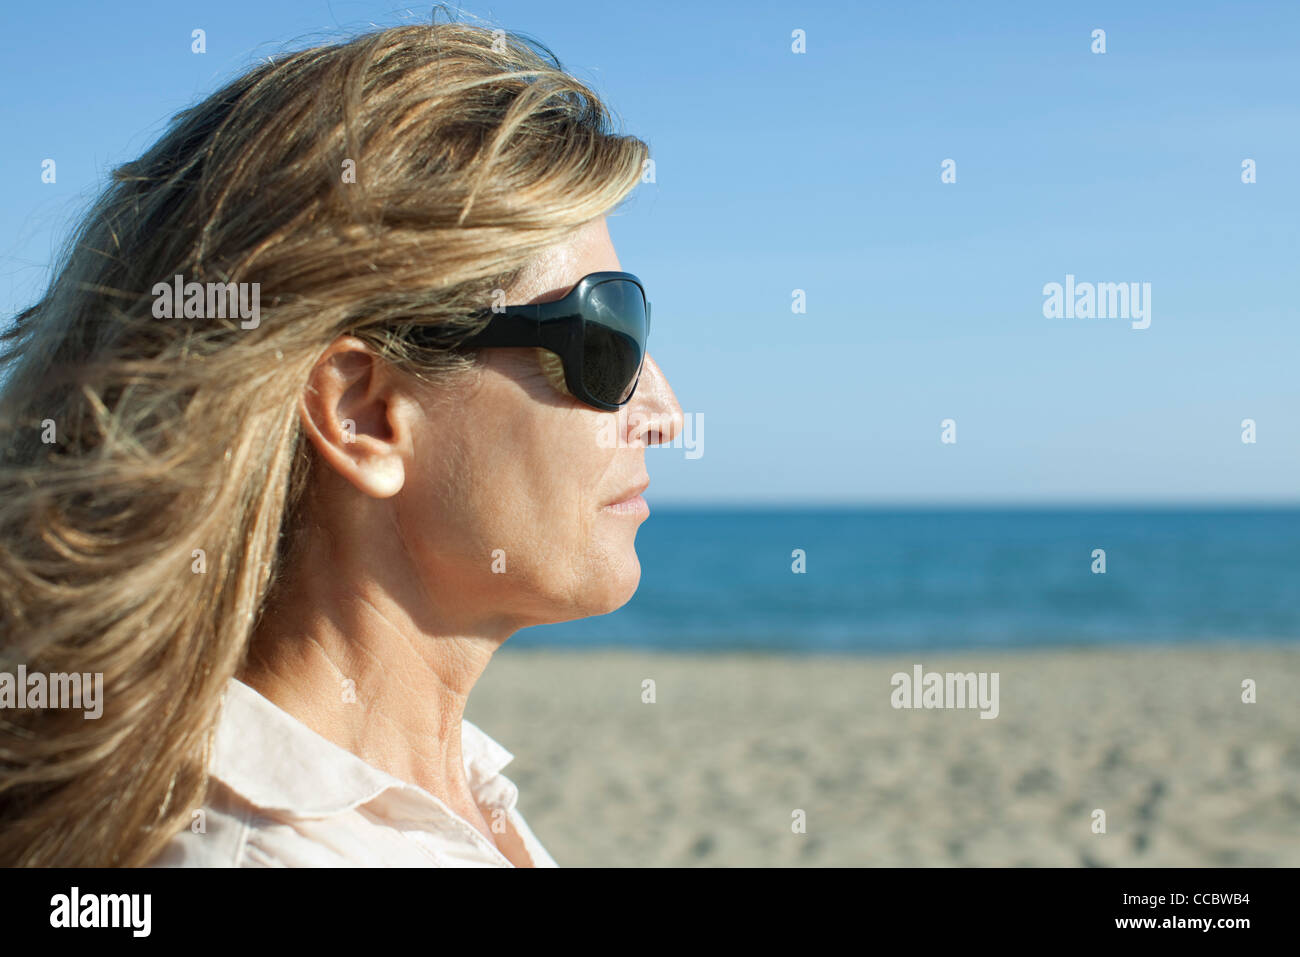 Woman at the beach, portrait Stock Photo